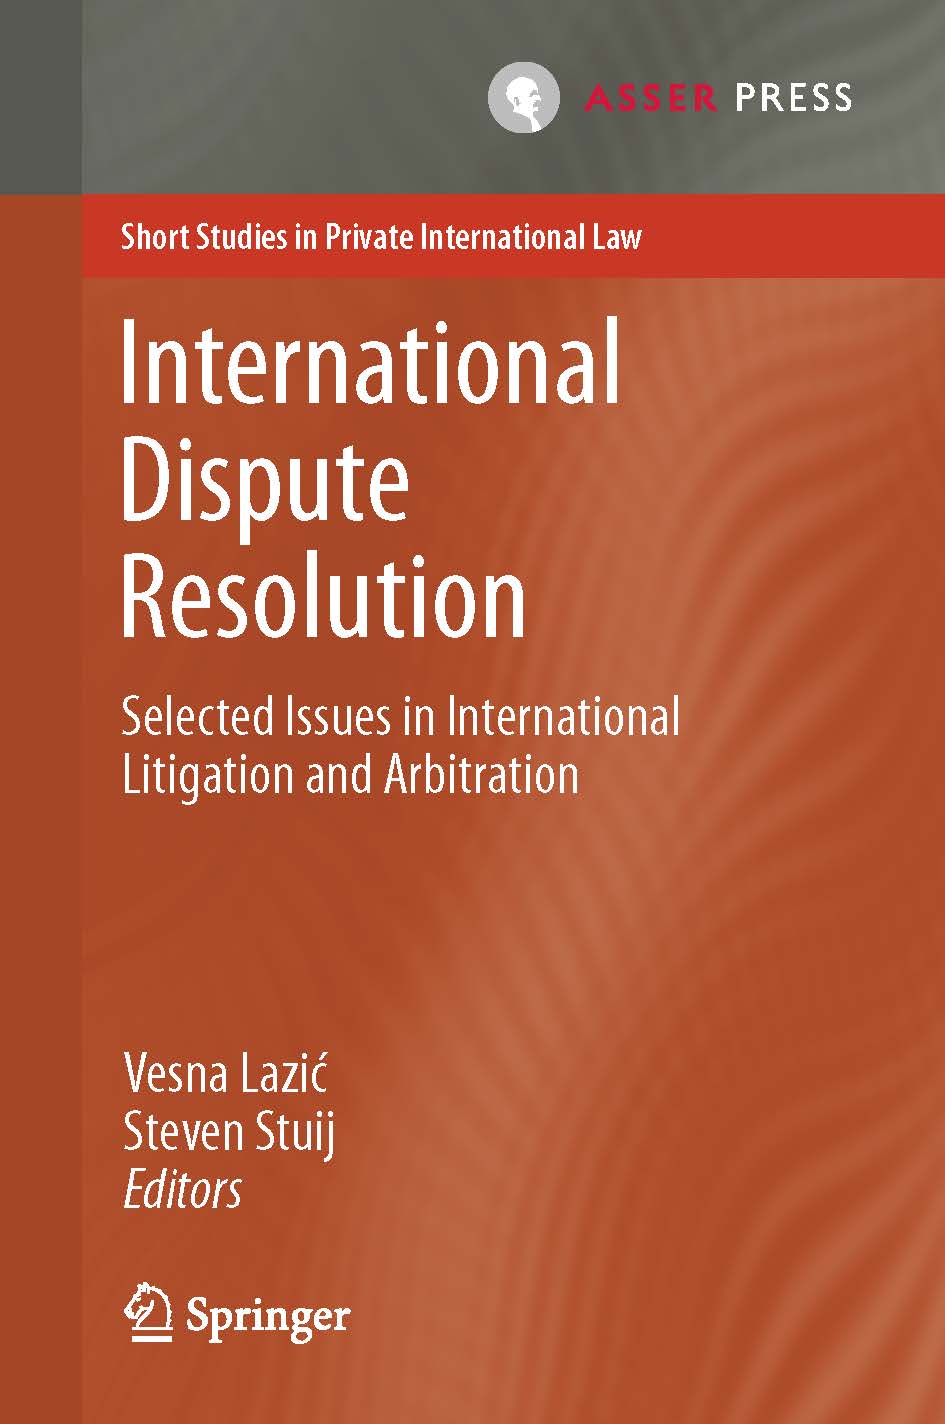 International Dispute Resolution - Selected Issues in International Litigation and Arbitration